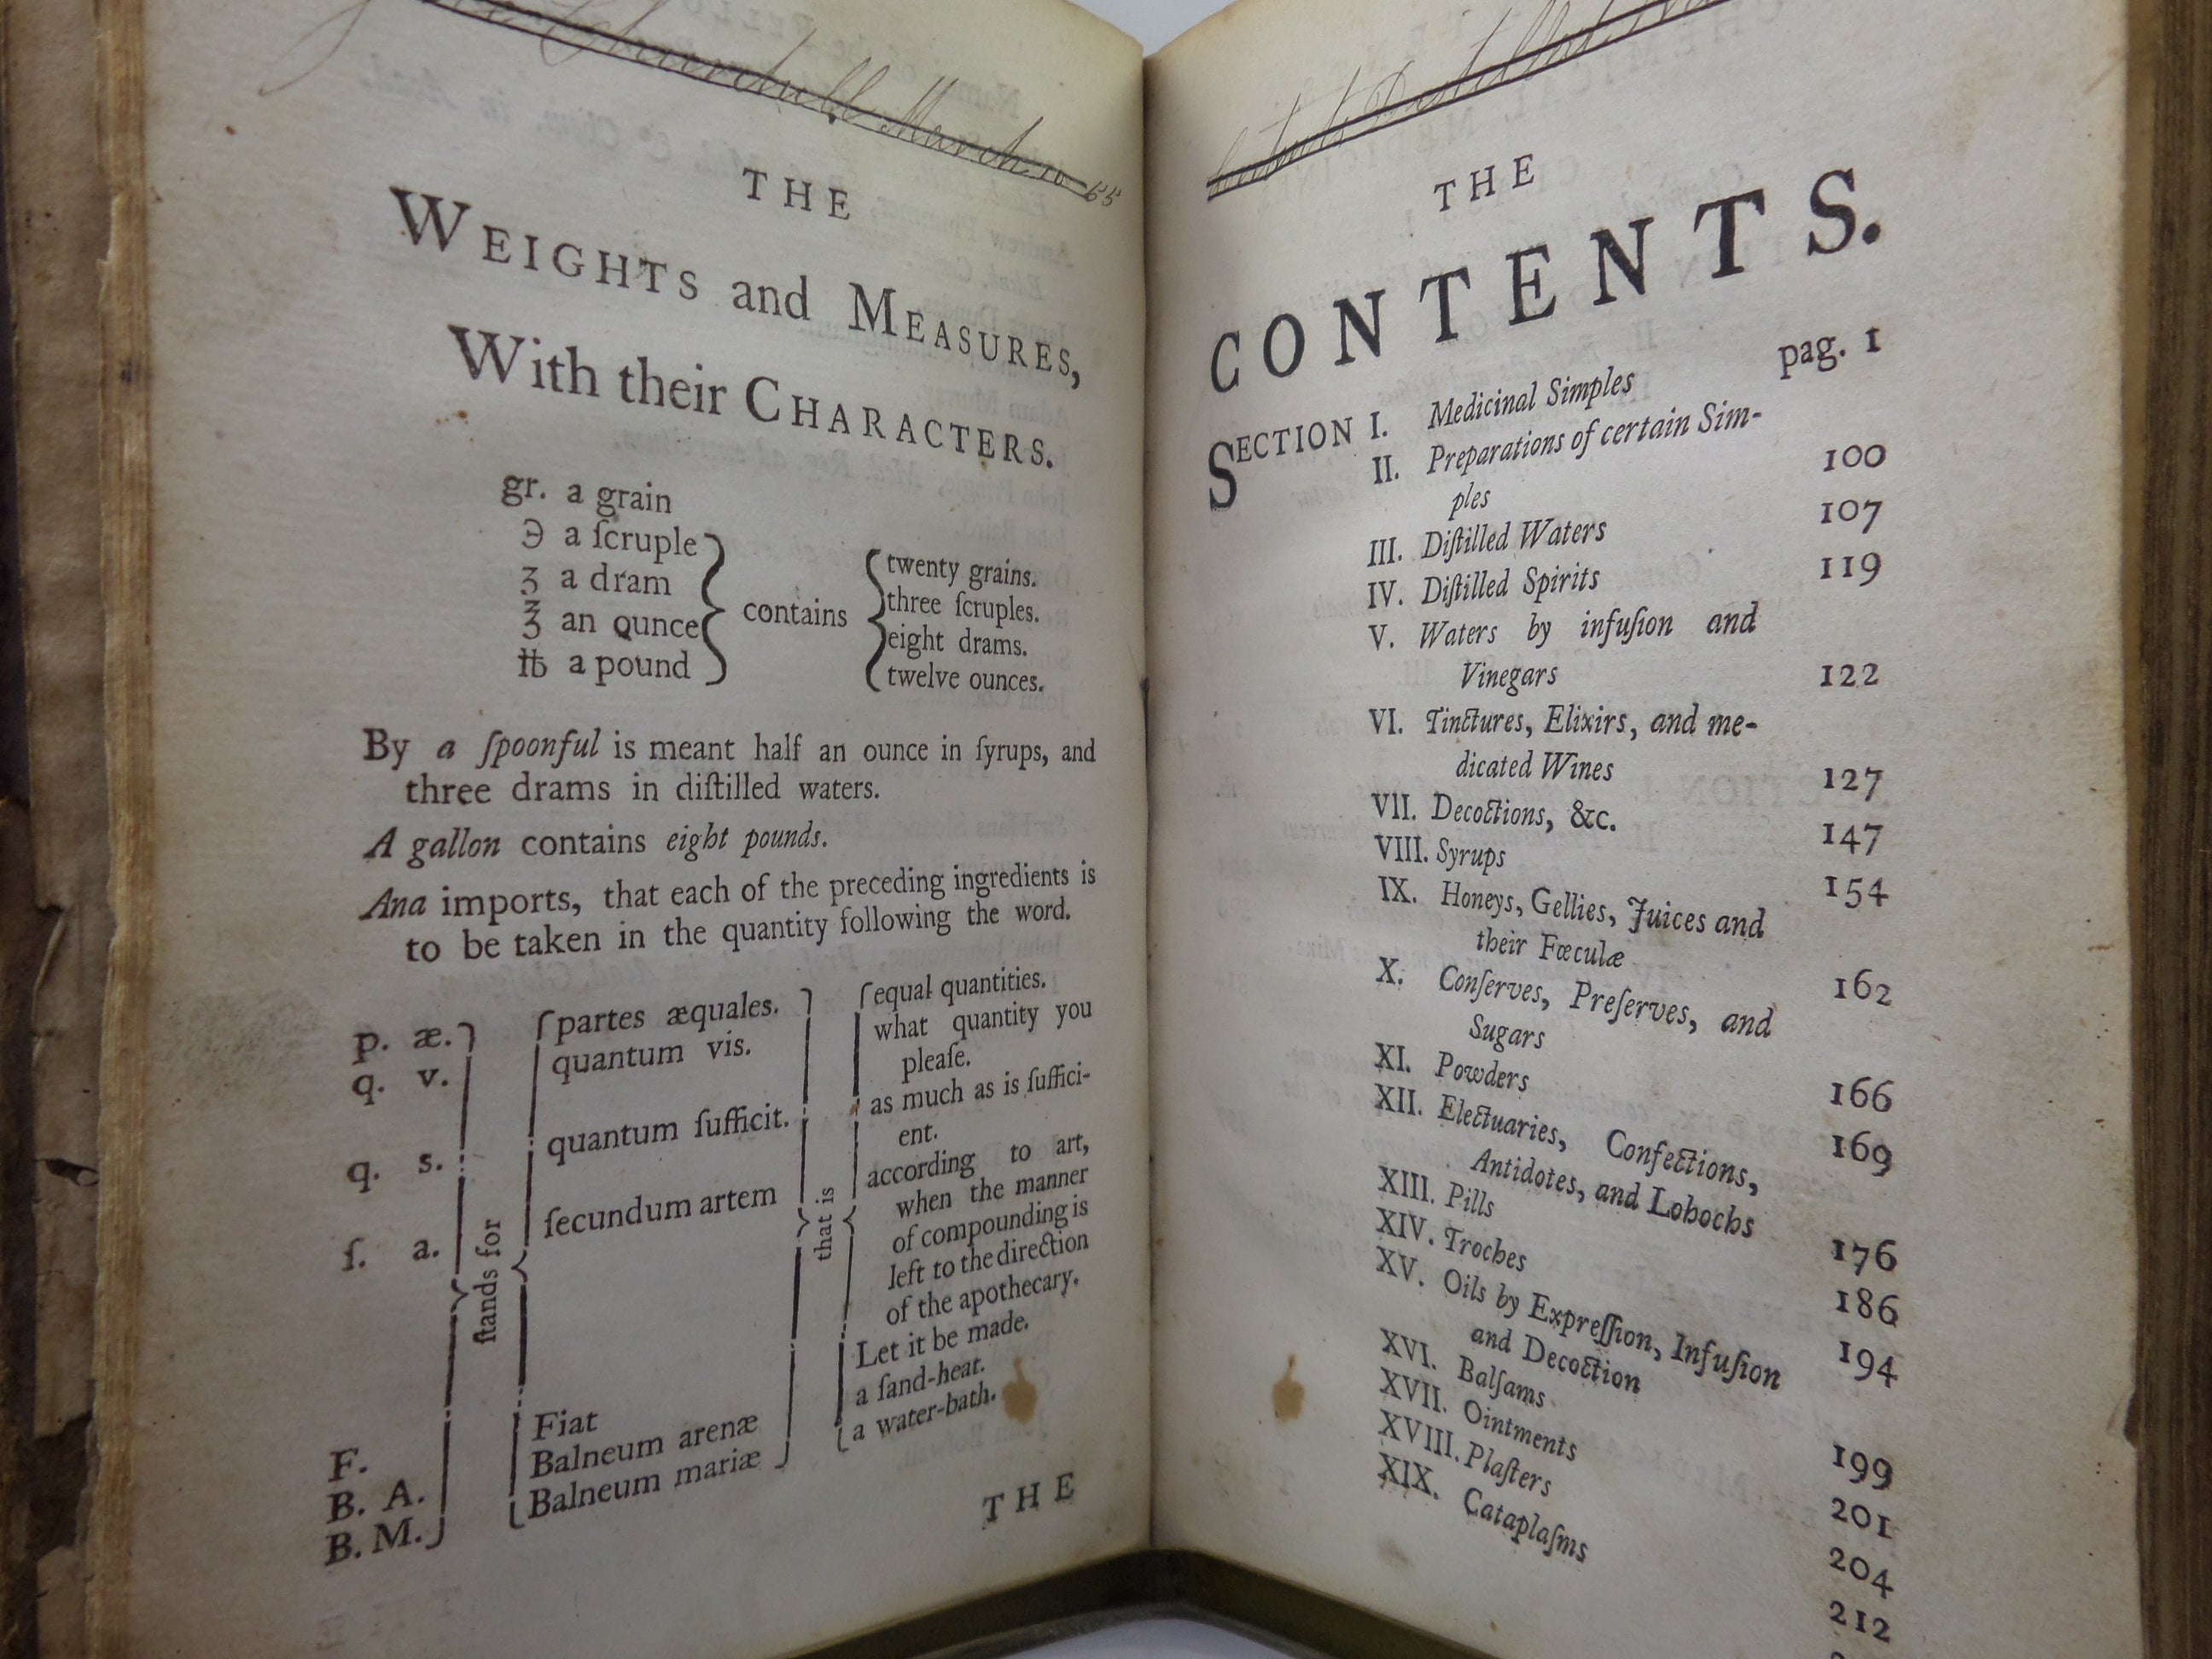 THE PHARMACOPOEIA OF THE ROYAL COLLEGE OF PHYSICIANS AT EDINBURGH 1748 W. LEWIS